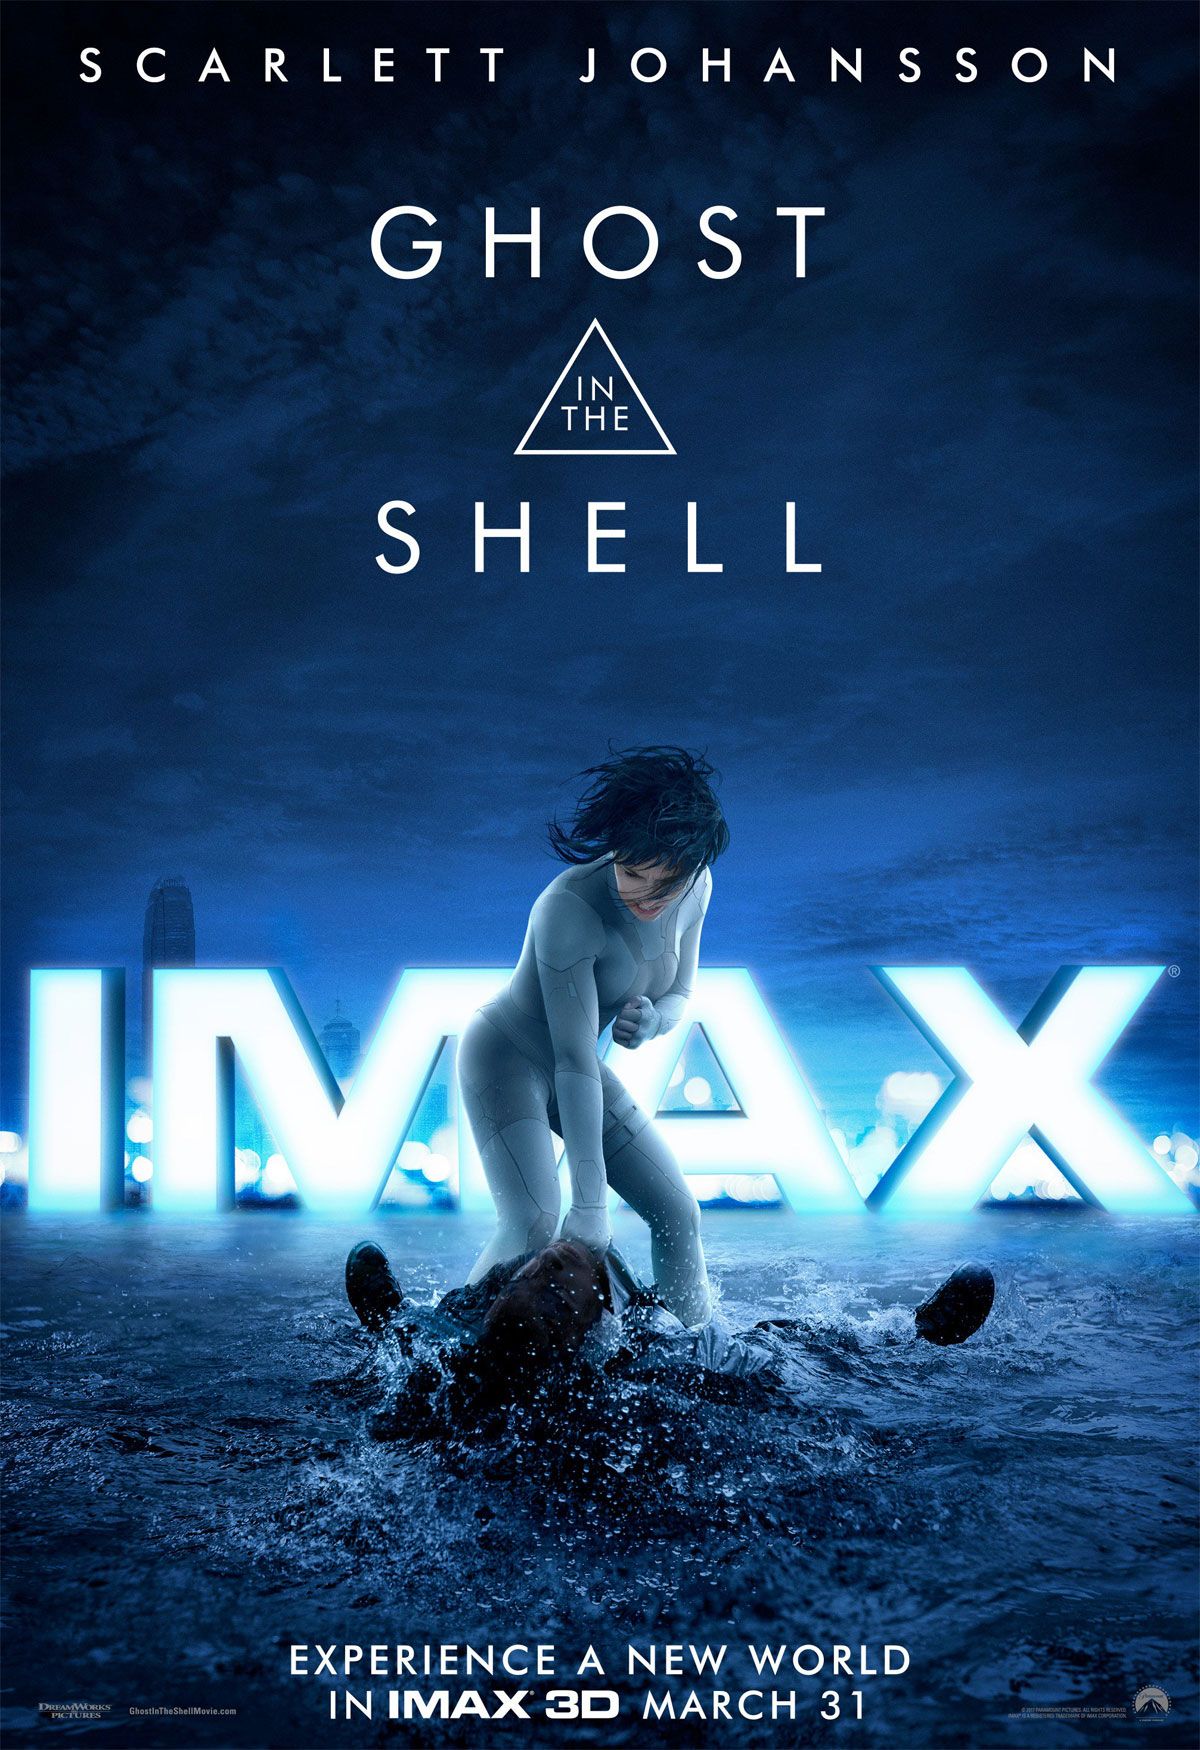 ghost-in-the-shell-imax-poster.jpg